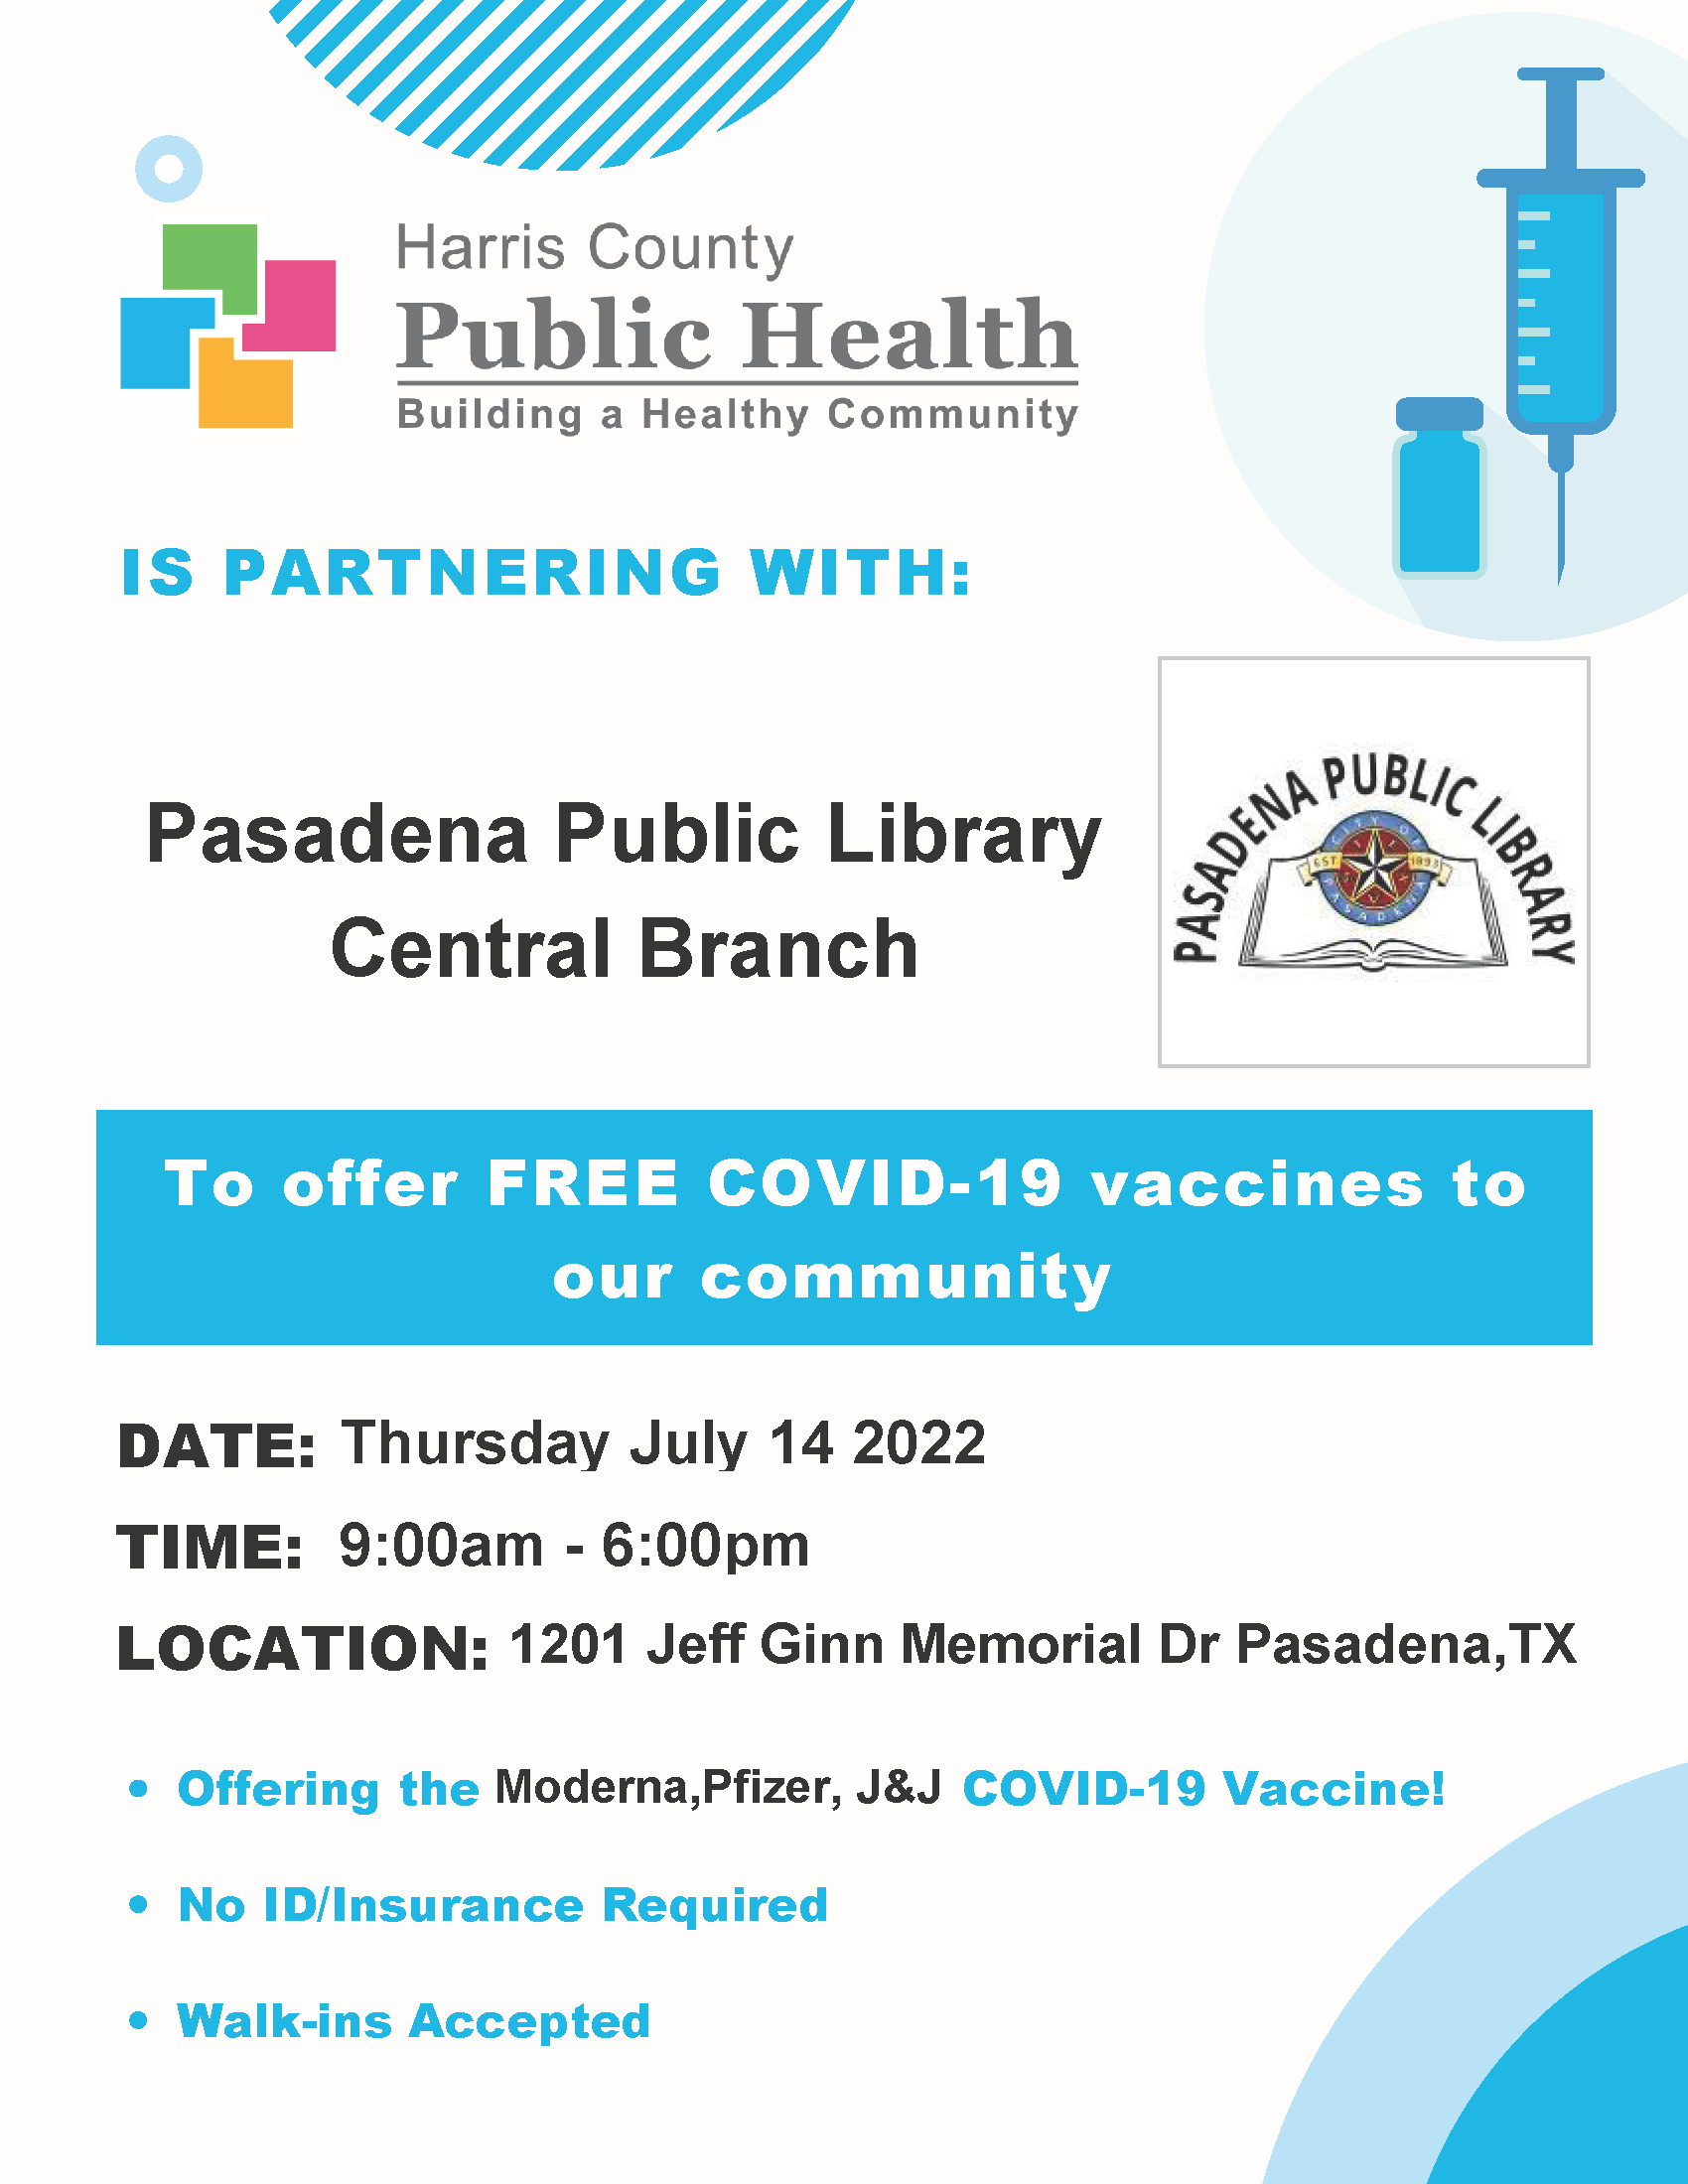 Harris County Public Health is partnering with the Pasadena Public Library to offer FREE COVID-19 vaccines on Thursday, July 7 from 9:00 AM to 6:00 PM in the Central Library Meeting Room at 1201 Jeff Ginn Memorial Drive! 